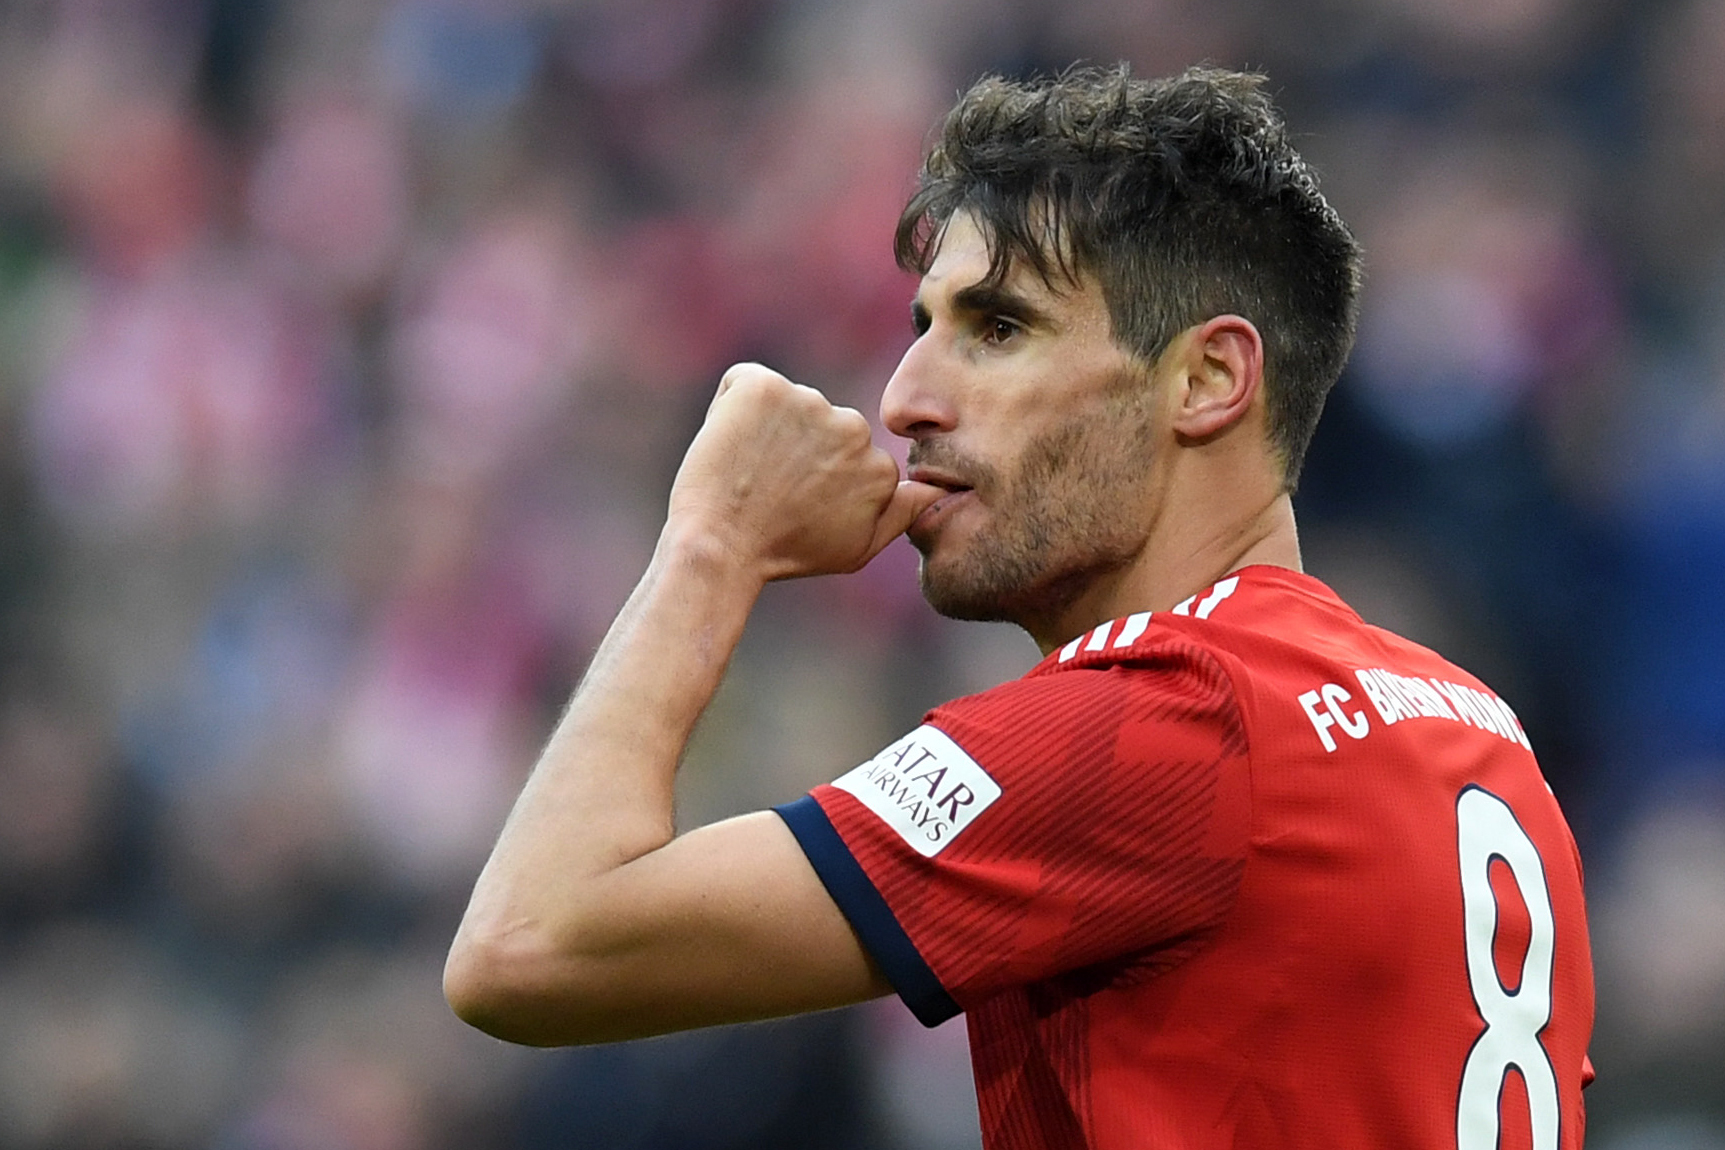 <HIT>Bayern</HIT> Munichs Spanish midfielder Javi Martinez reacts after scoring during the German first division Bundesliga football match <HIT>Bayern</HIT> Munich vs Hertha Berlin in Munich on February 23, 2019. (Photo by Christof STACHE / AFP) / DFL REGULATIONS PROHIBIT ANY USE OF PHOTOGRAPHS AS IMAGE SEQUENCES AND/OR QUASI-VIDEO